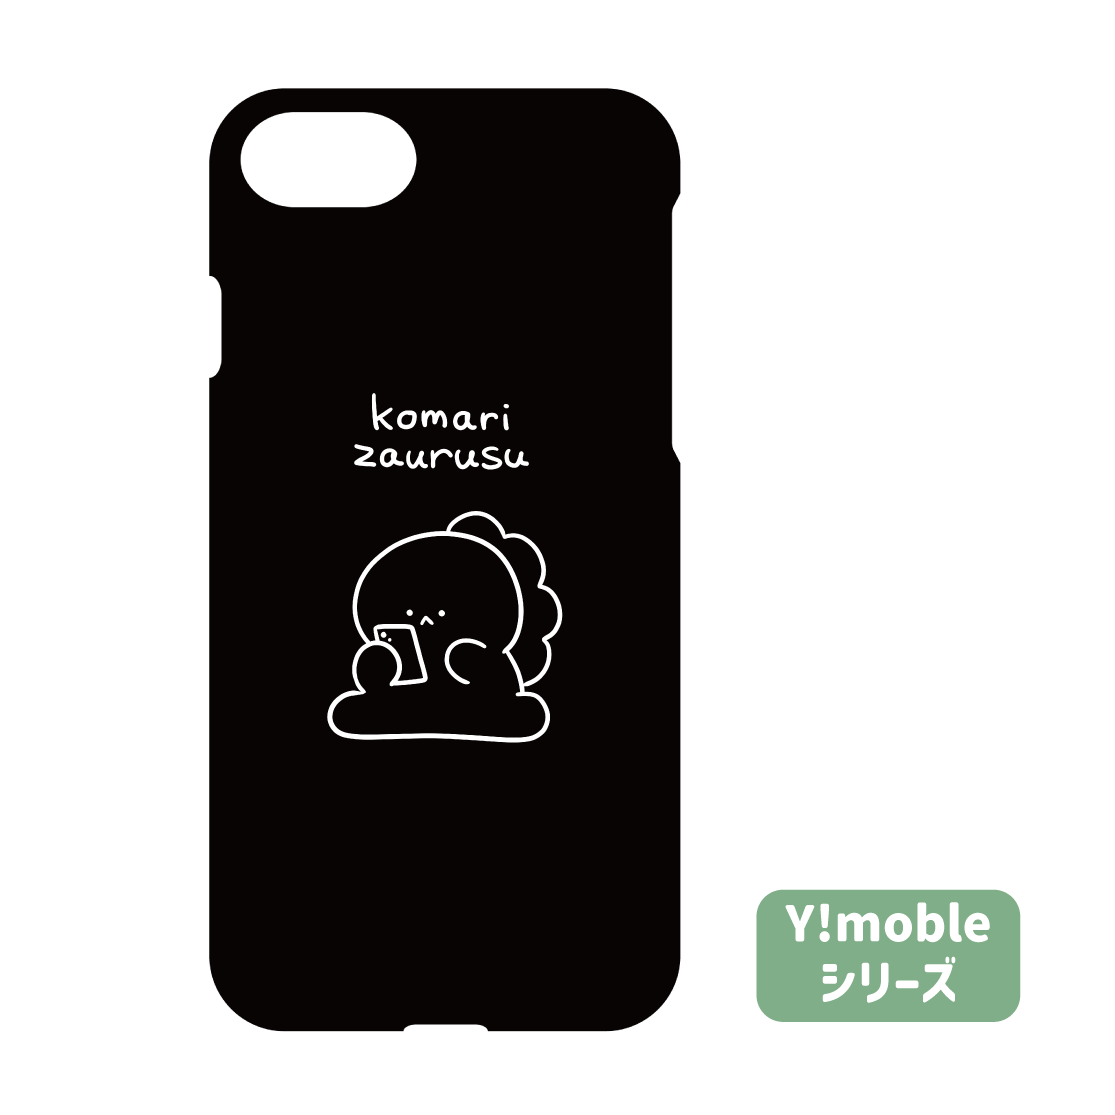 [Troublesome Zaurus] Smartphone case compatible with almost all models Y!mobile series (Troubled Zaurus) [Shipped in early June]